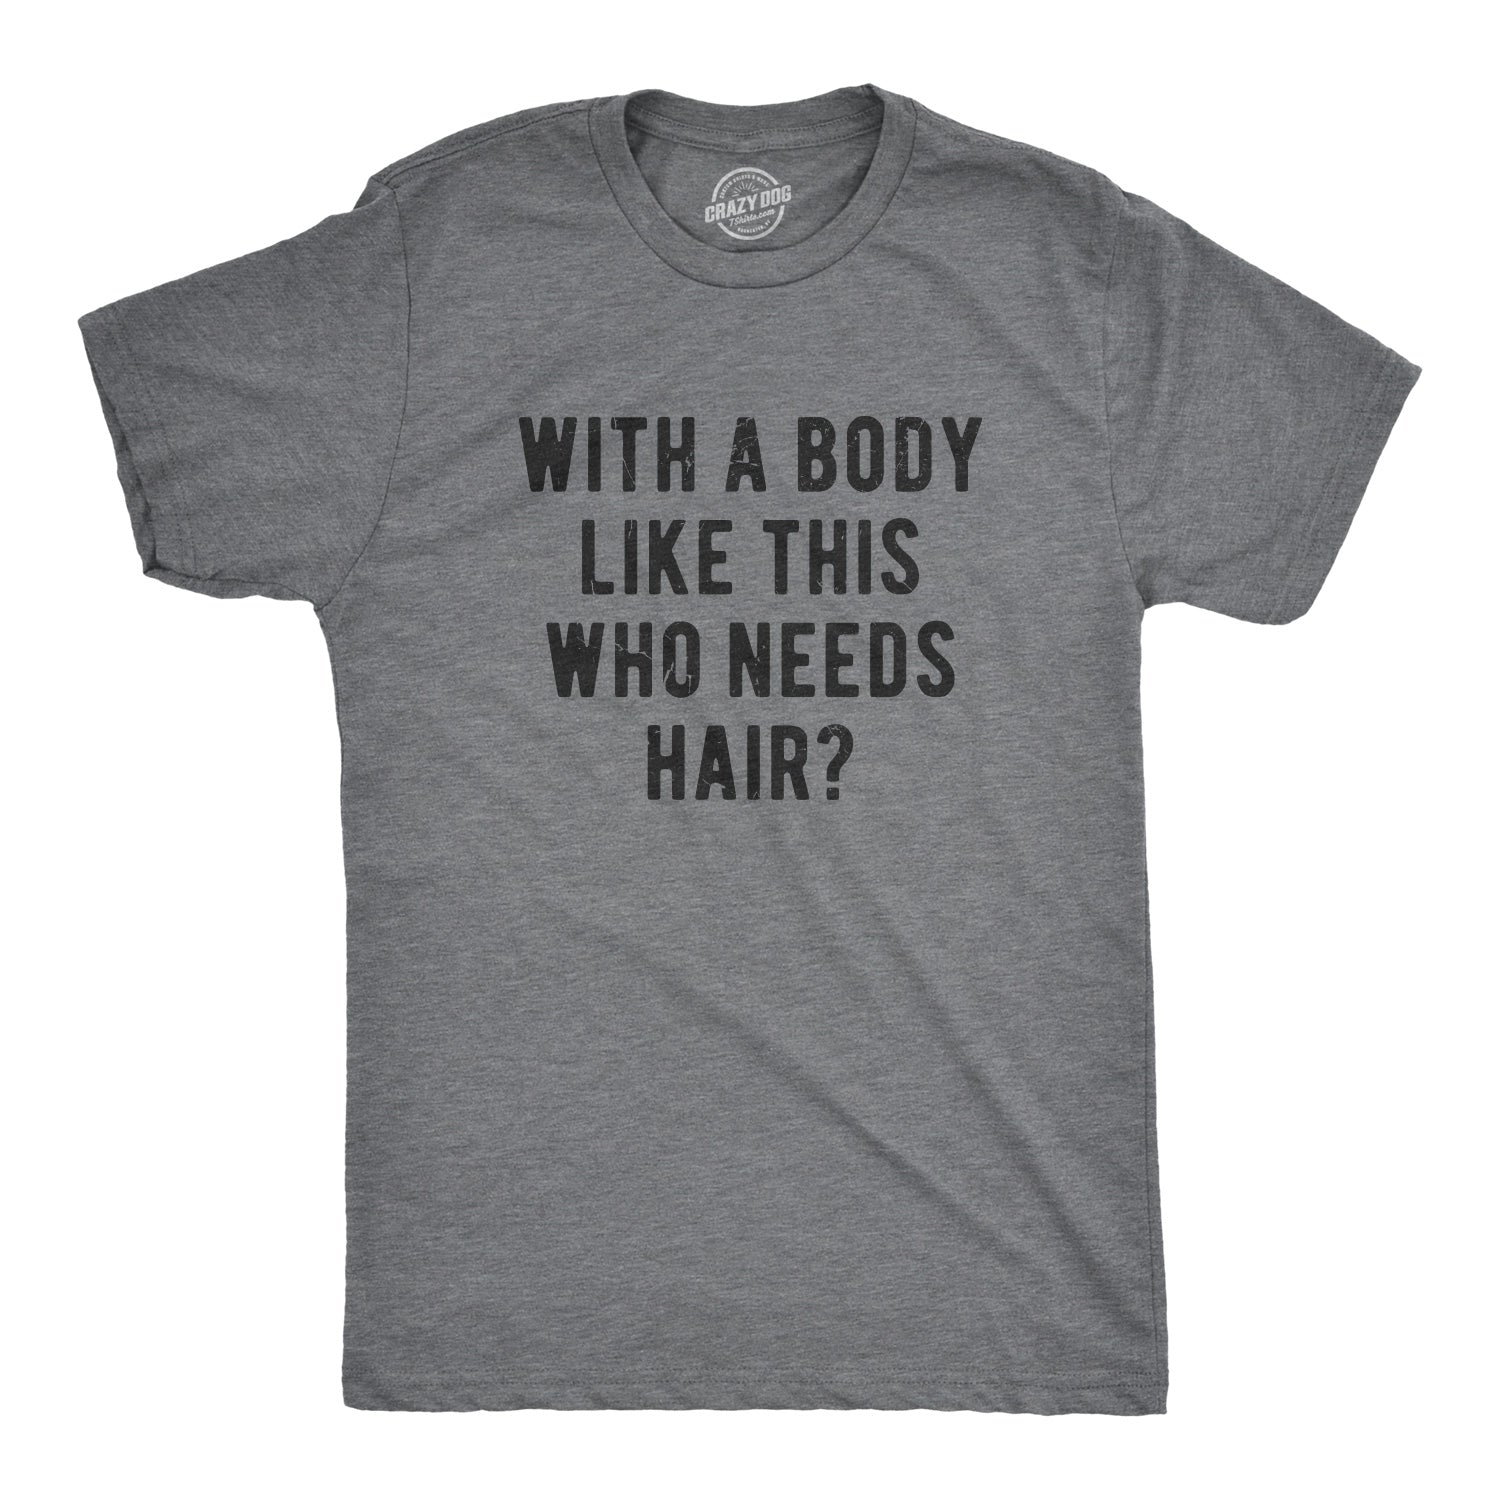 Workout Shirt Men, Mens Gym Shirt, Funny Gym Top, Muscle Shirt, Gym Shirts  With Sayings, I Would Flex but I Like This Shirt -  Canada